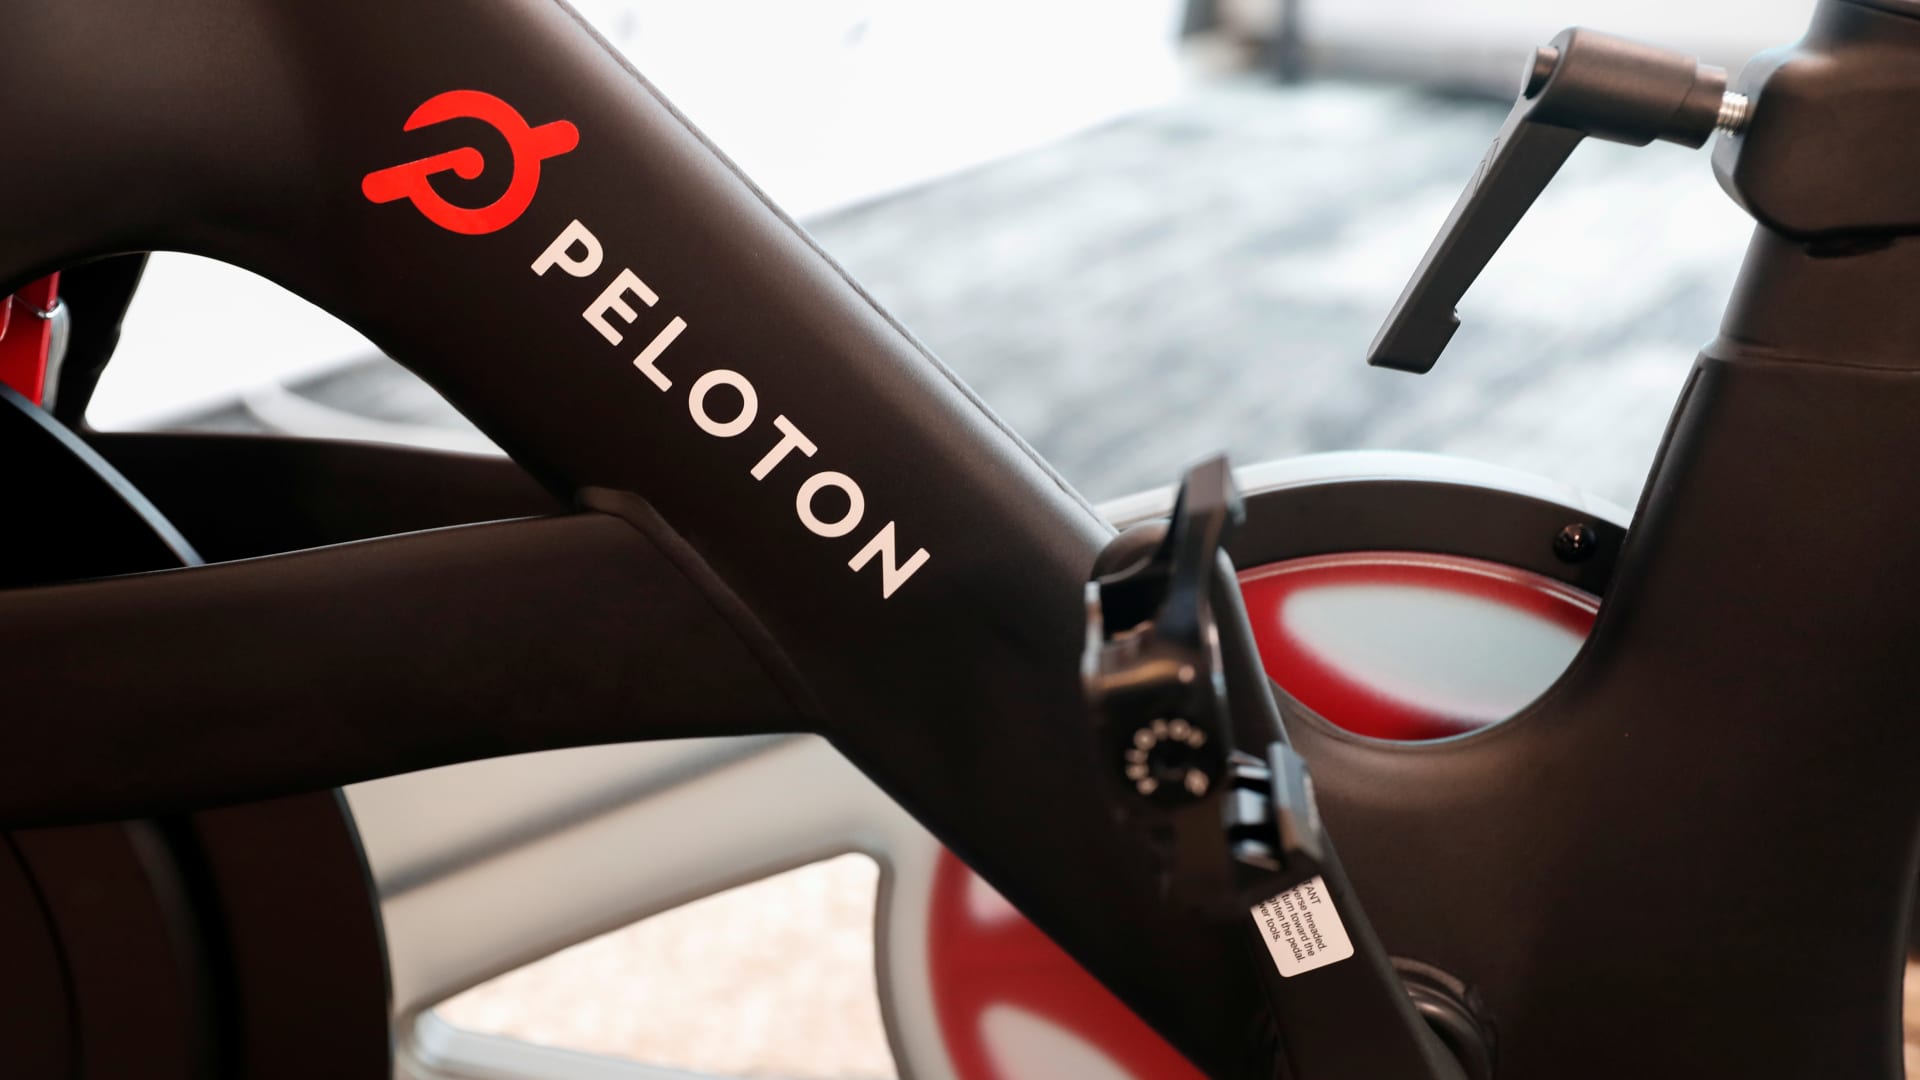 Peloton hires Amazon cloud exec to be new CFO in latest shake-up in top ranks